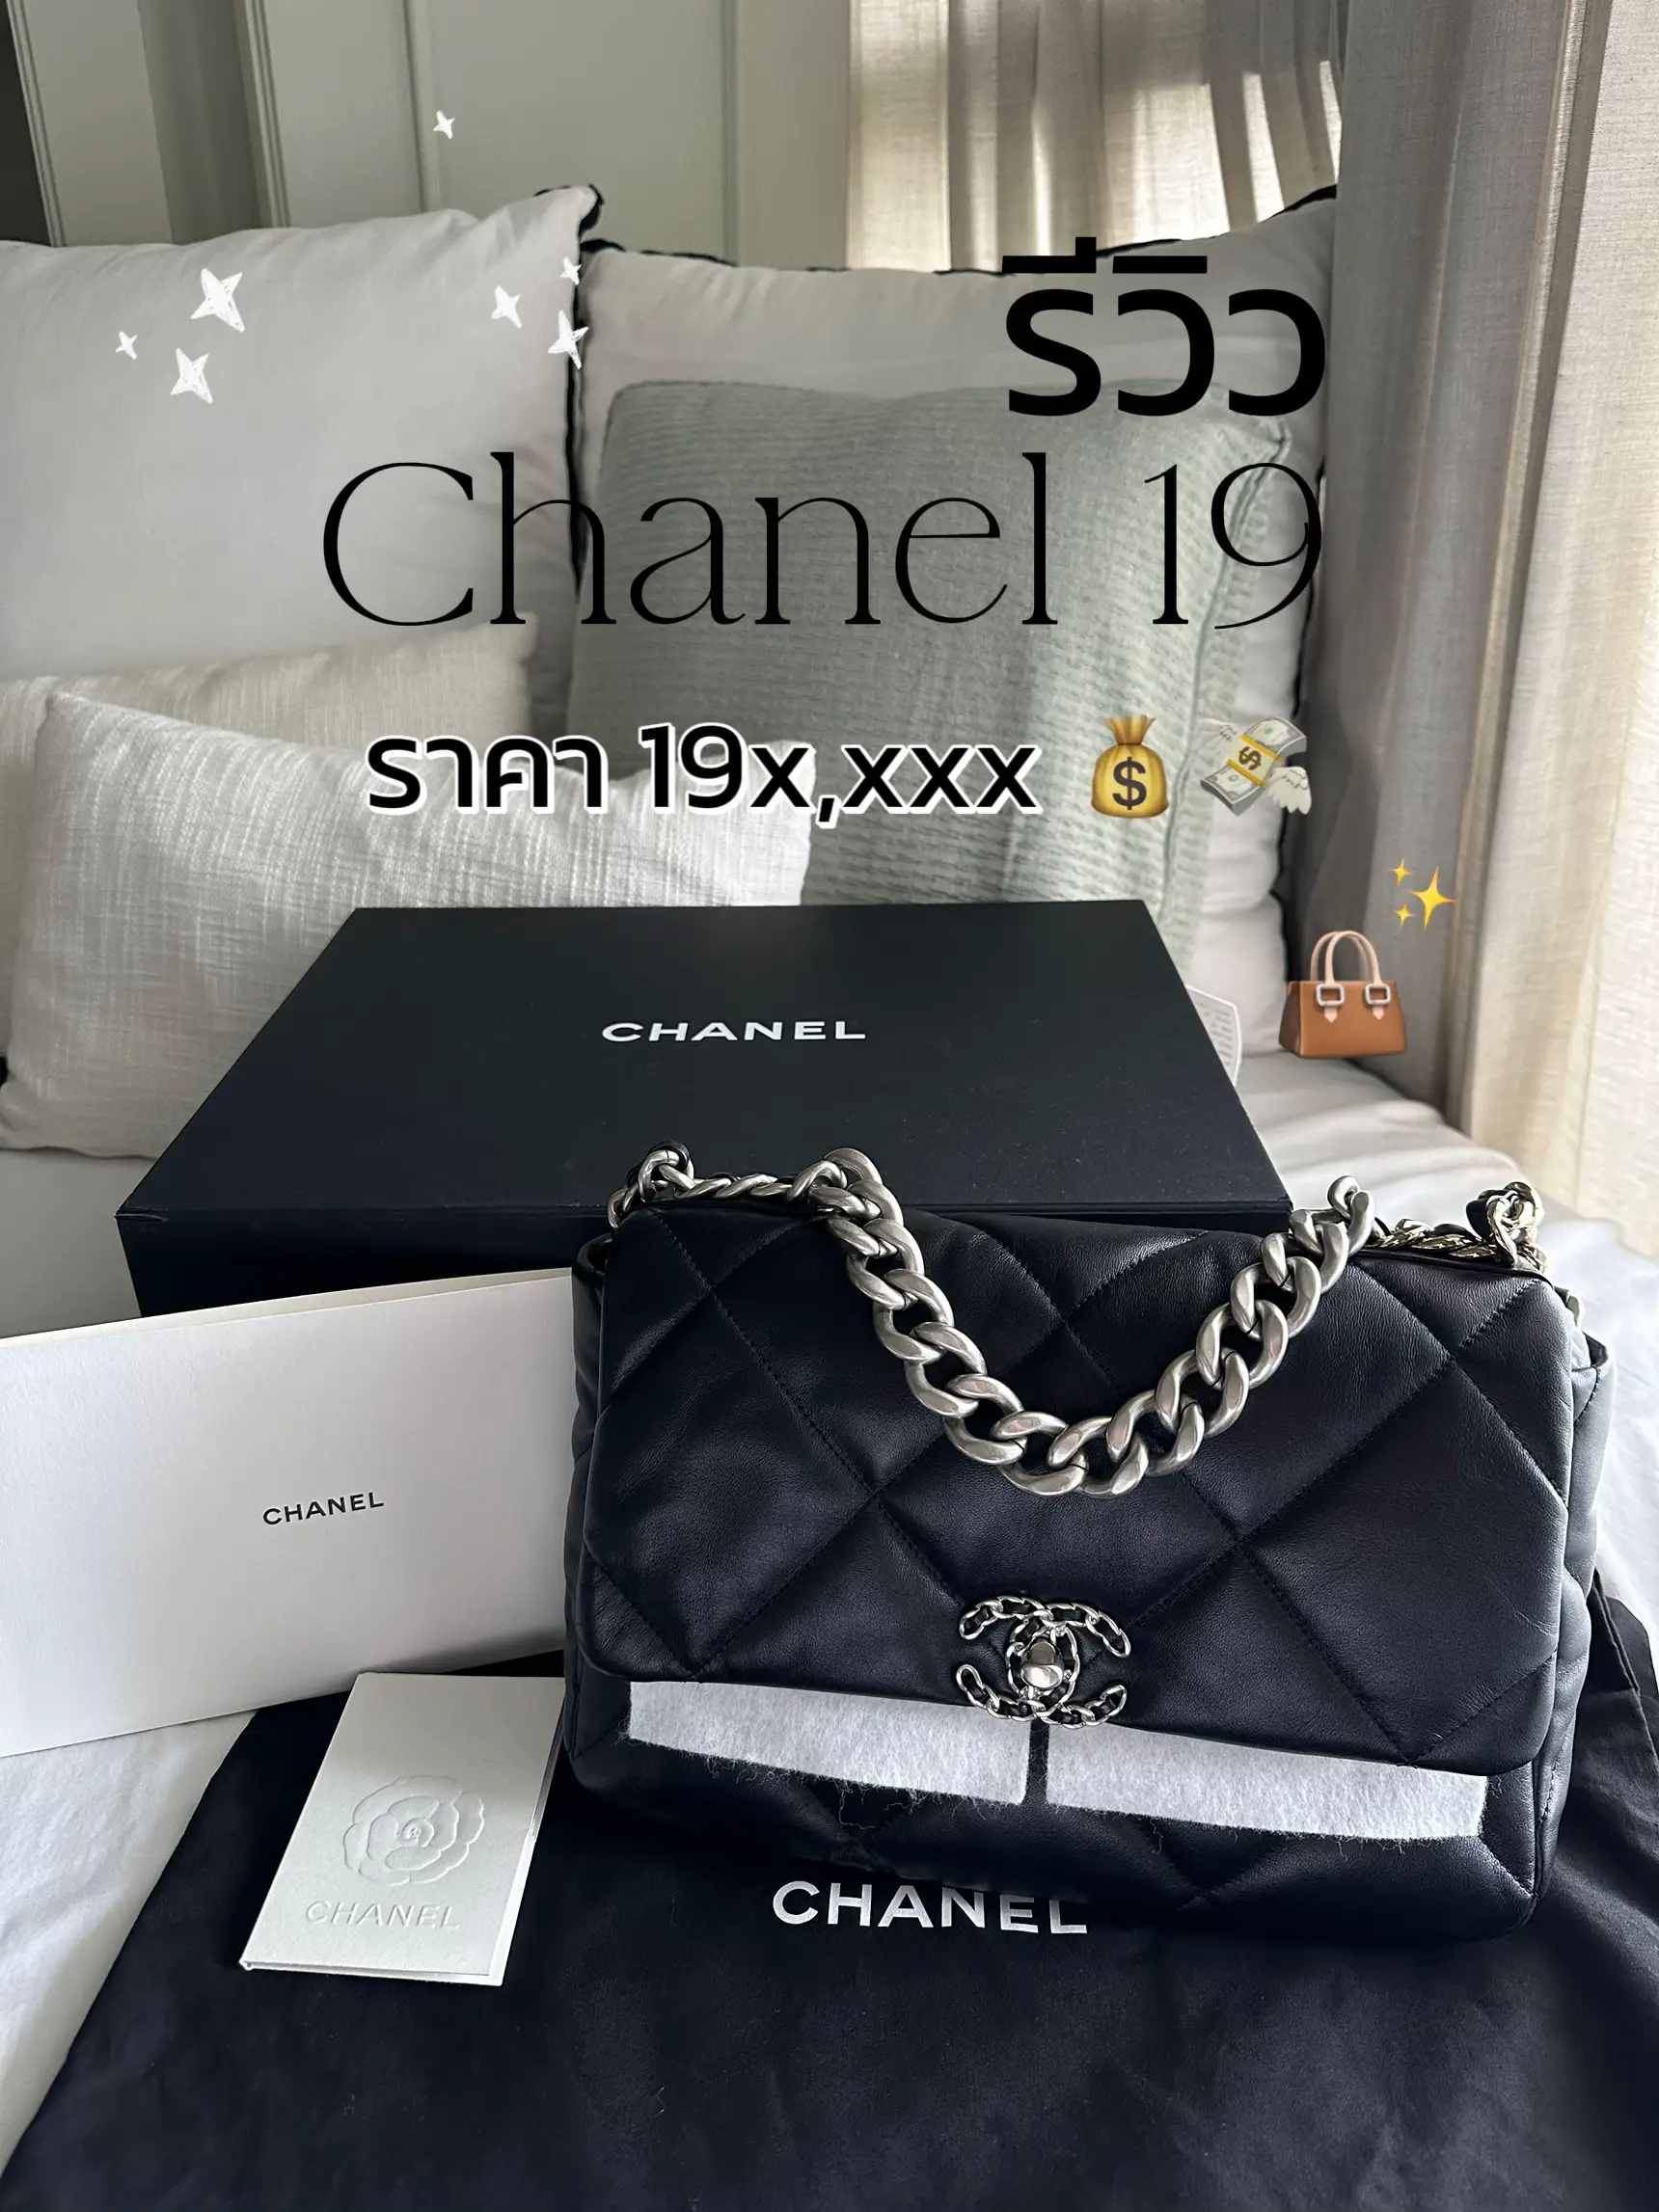 Chanel 19 Review (HAND 2) 👜✨, Gallery posted by ピピ ♡